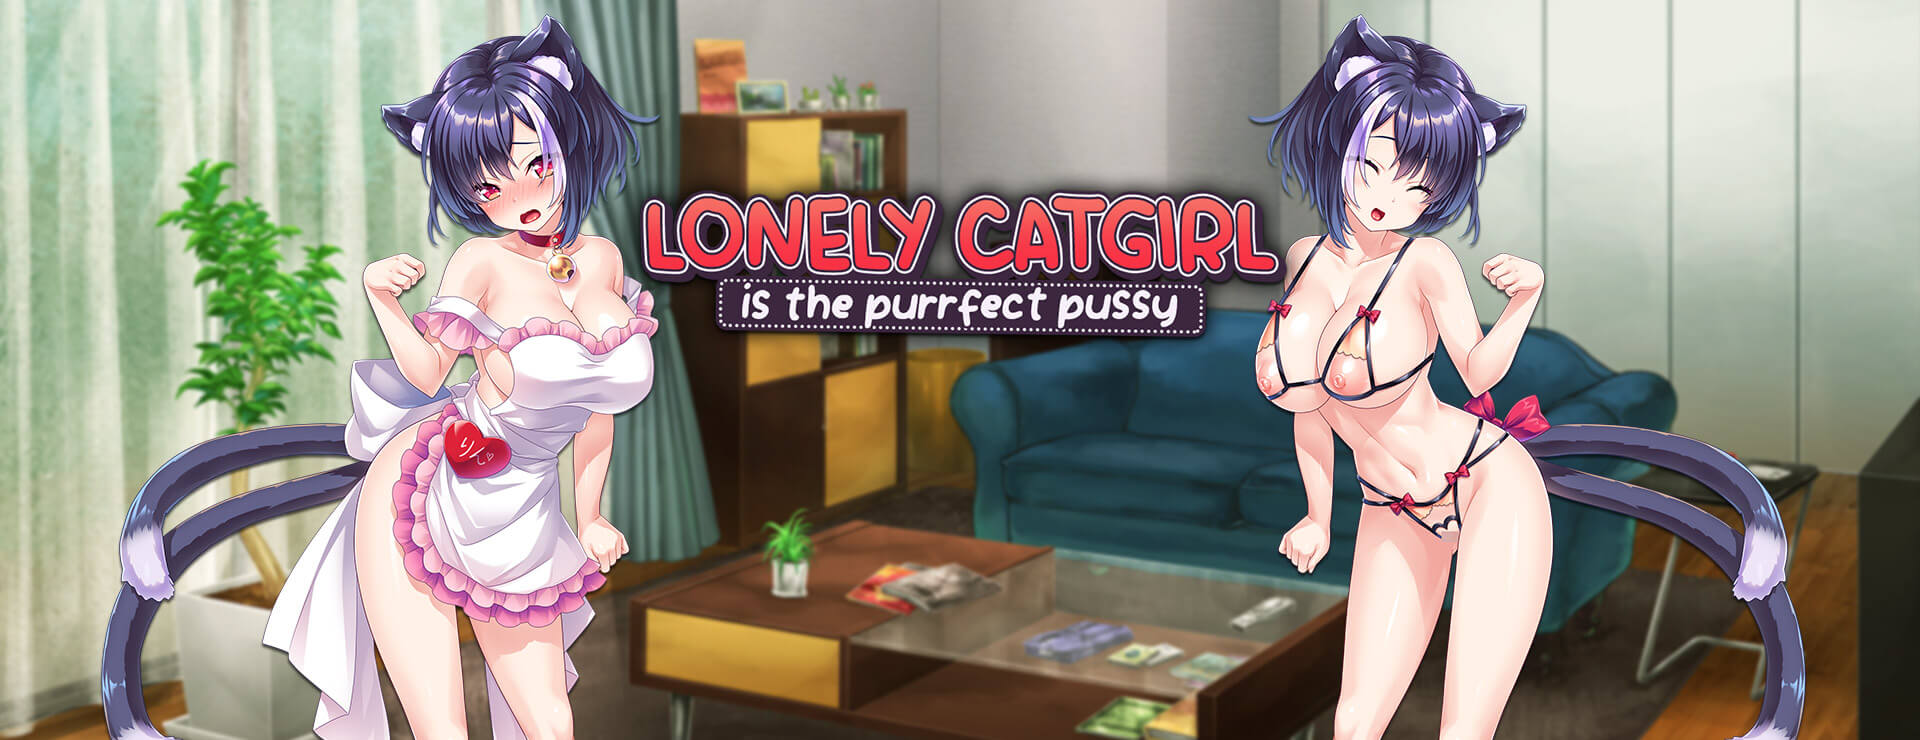 Lonely Catgirl is the Purrfect Pussy - 虚拟小说 遊戲